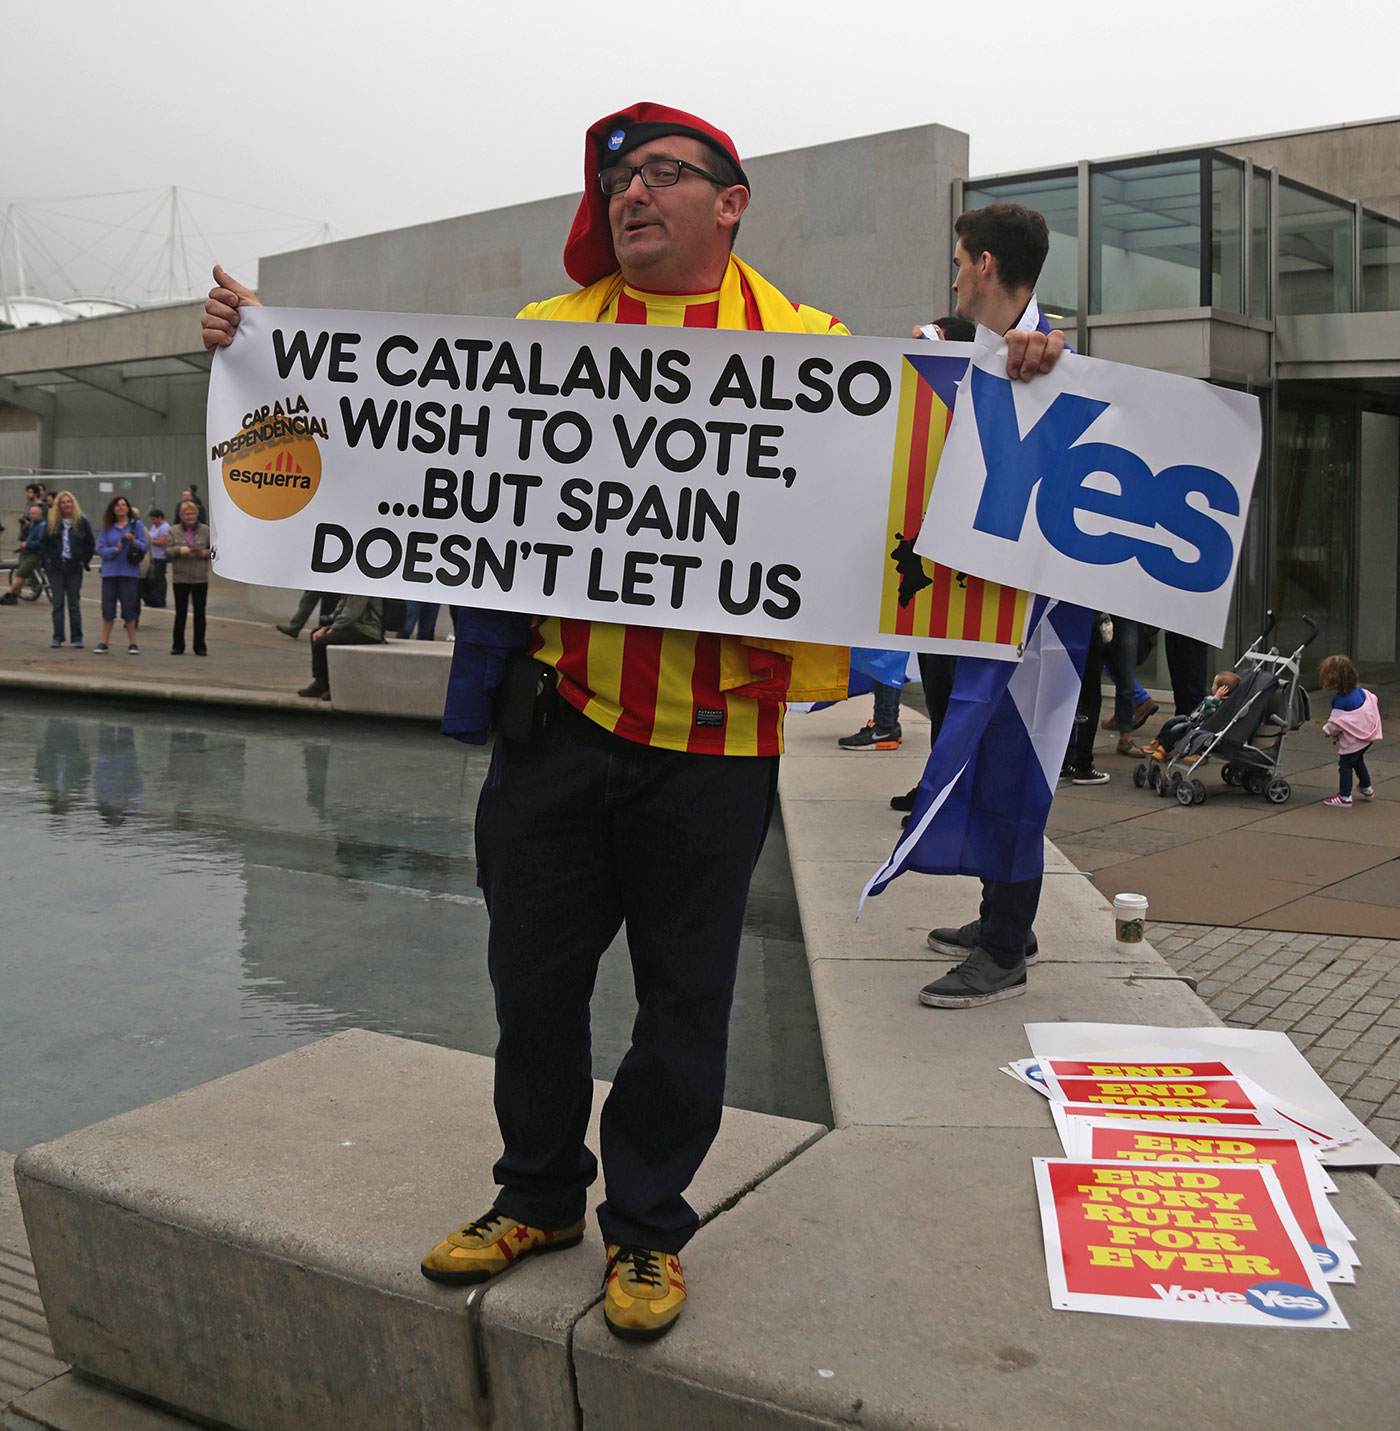 Photos taken in Edinburgh on voting day in the  Scottish Indepemdence Referendum on 18 September 2014  -  Visitor from Catalonia